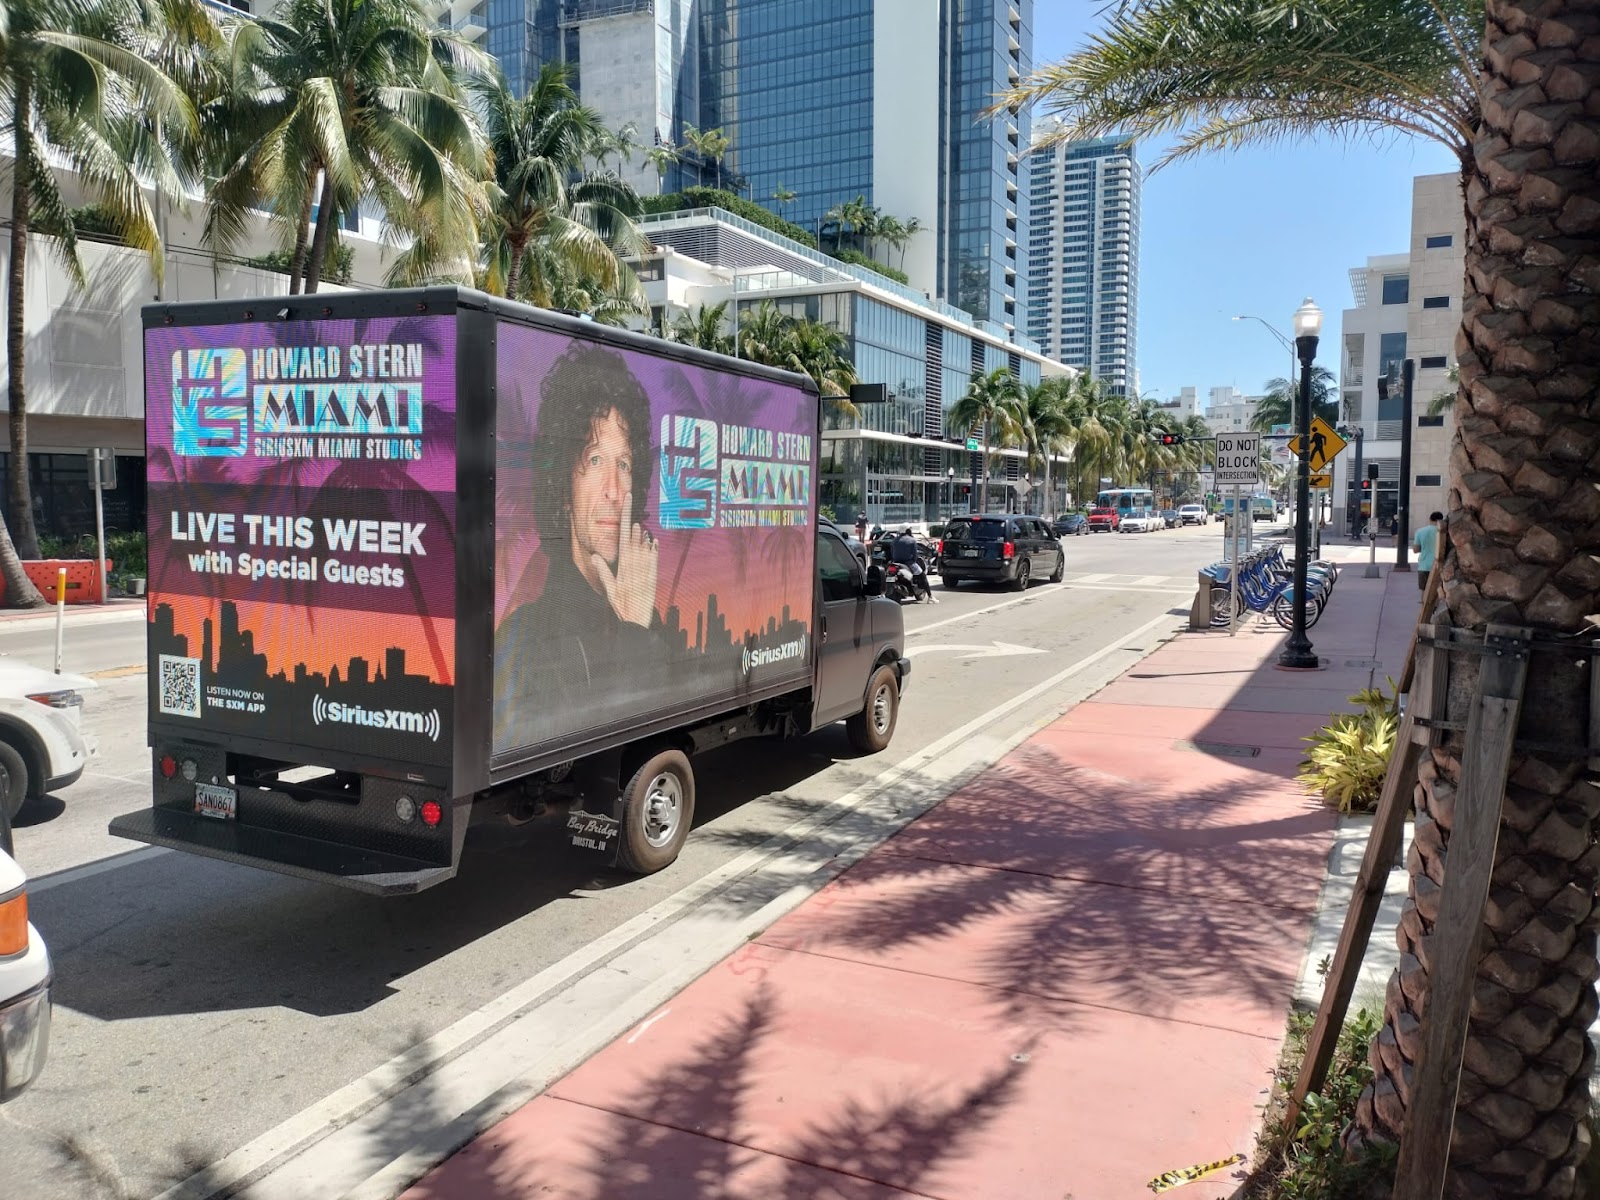 Miami Mobile Billboard shows SiriusXM Ad with Live with Howard Stern. Howard Stern is smiling on a Mobile LED display truck.